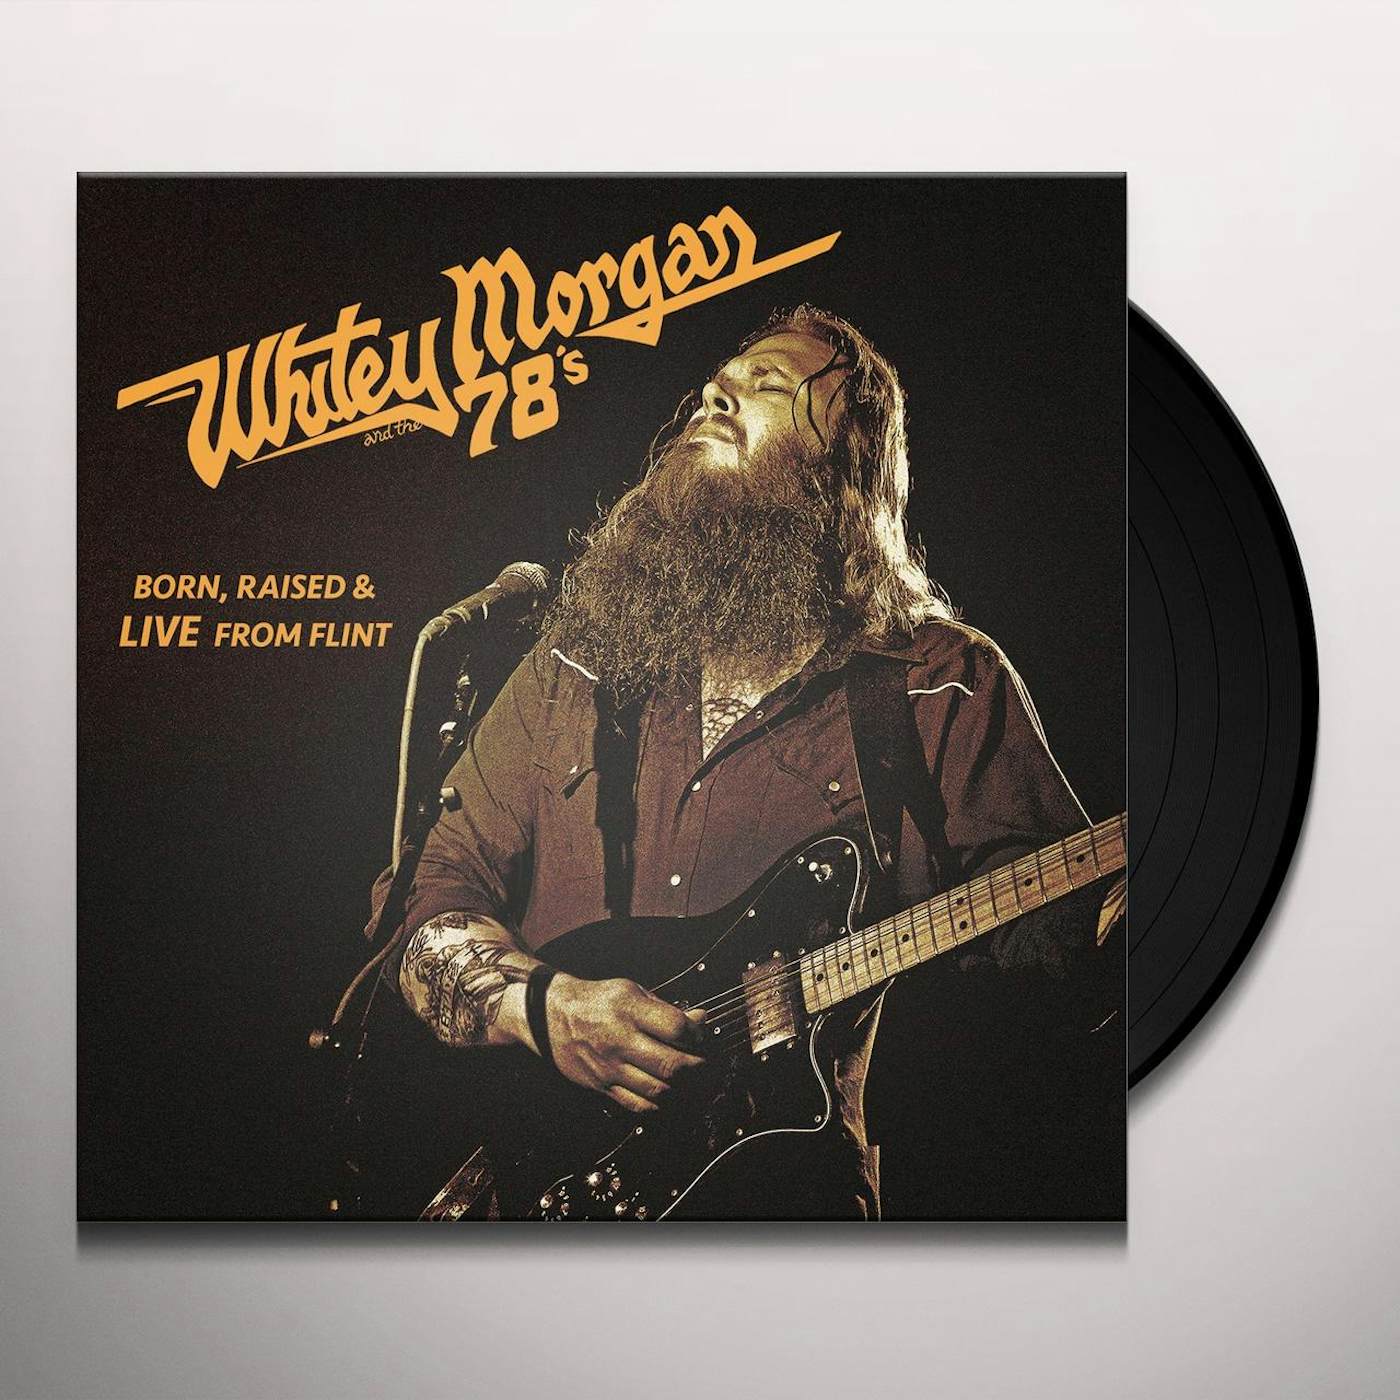 Whitey Morgan and the 78's BORN RAISED & LIVE FROM FLINT Vinyl Record